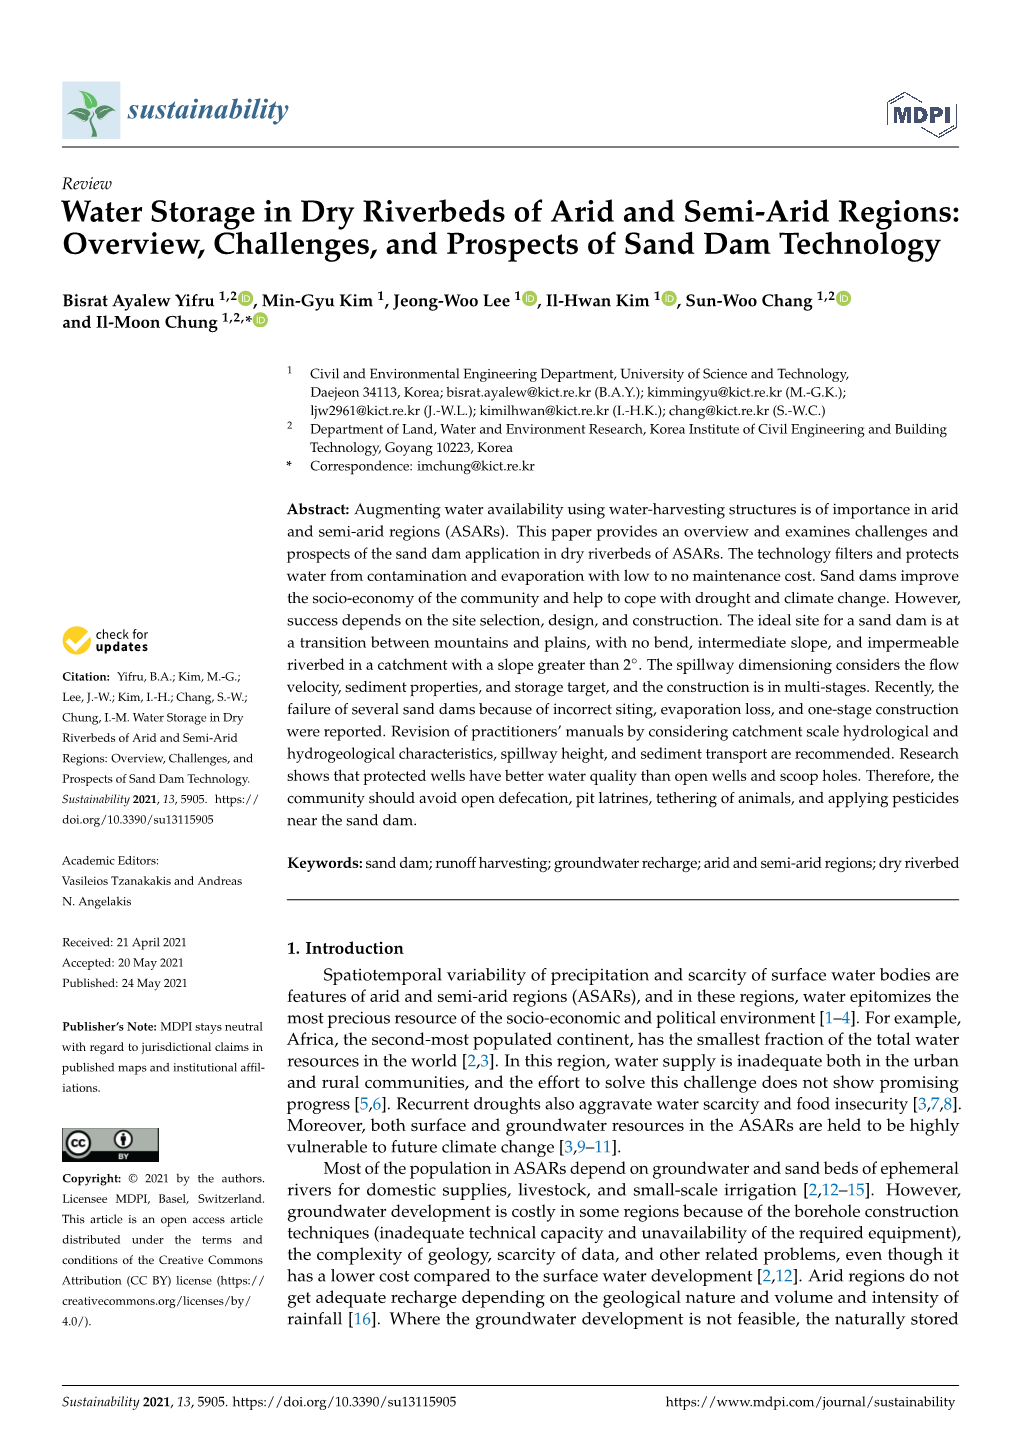 Water Storage in Dry Riverbeds of Arid and Semi-Arid Regions: Overview, Challenges, and Prospects of Sand Dam Technology